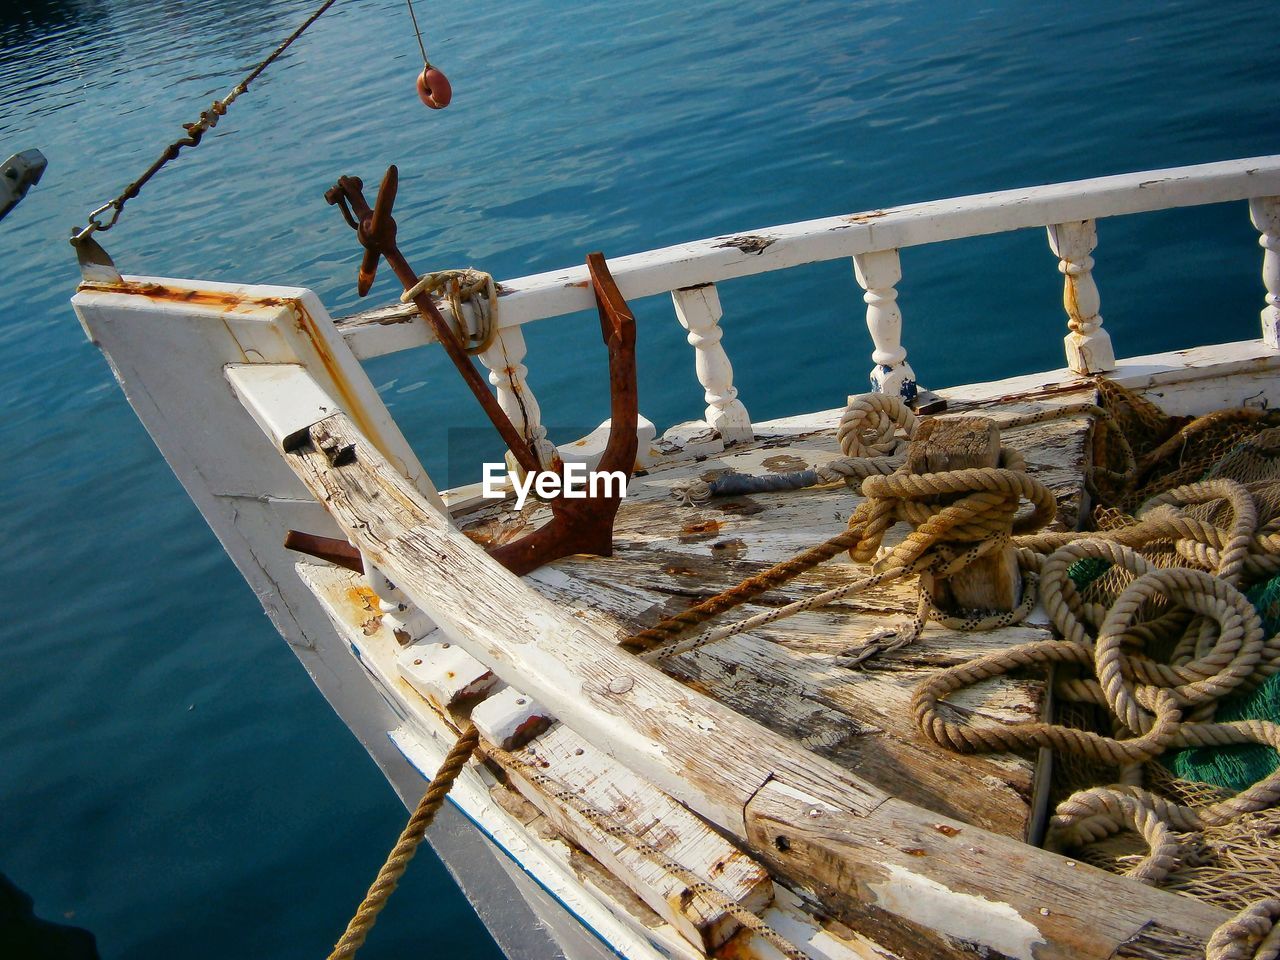 HIGH ANGLE VIEW OF FISHING BOAT MOORED IN SEA